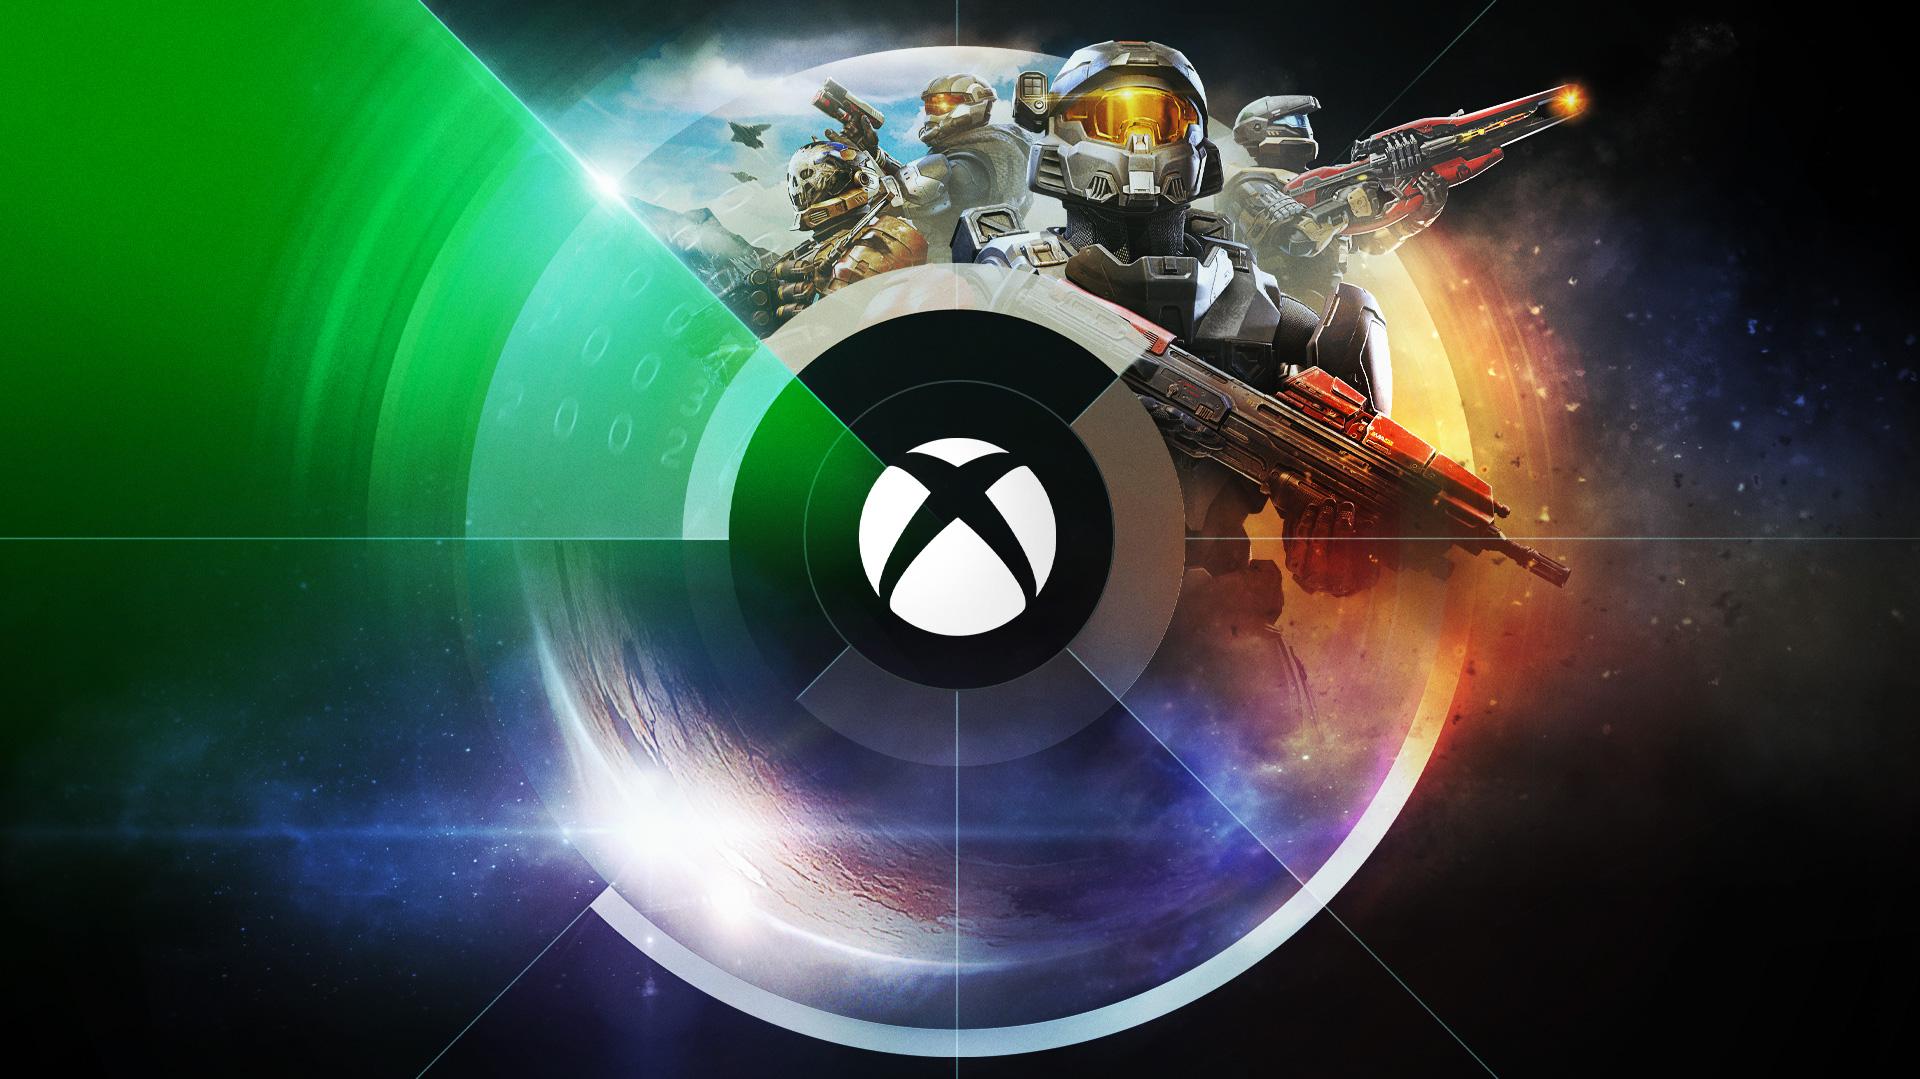 Over 300 official Xbox wallpapers for your PC mobile or console